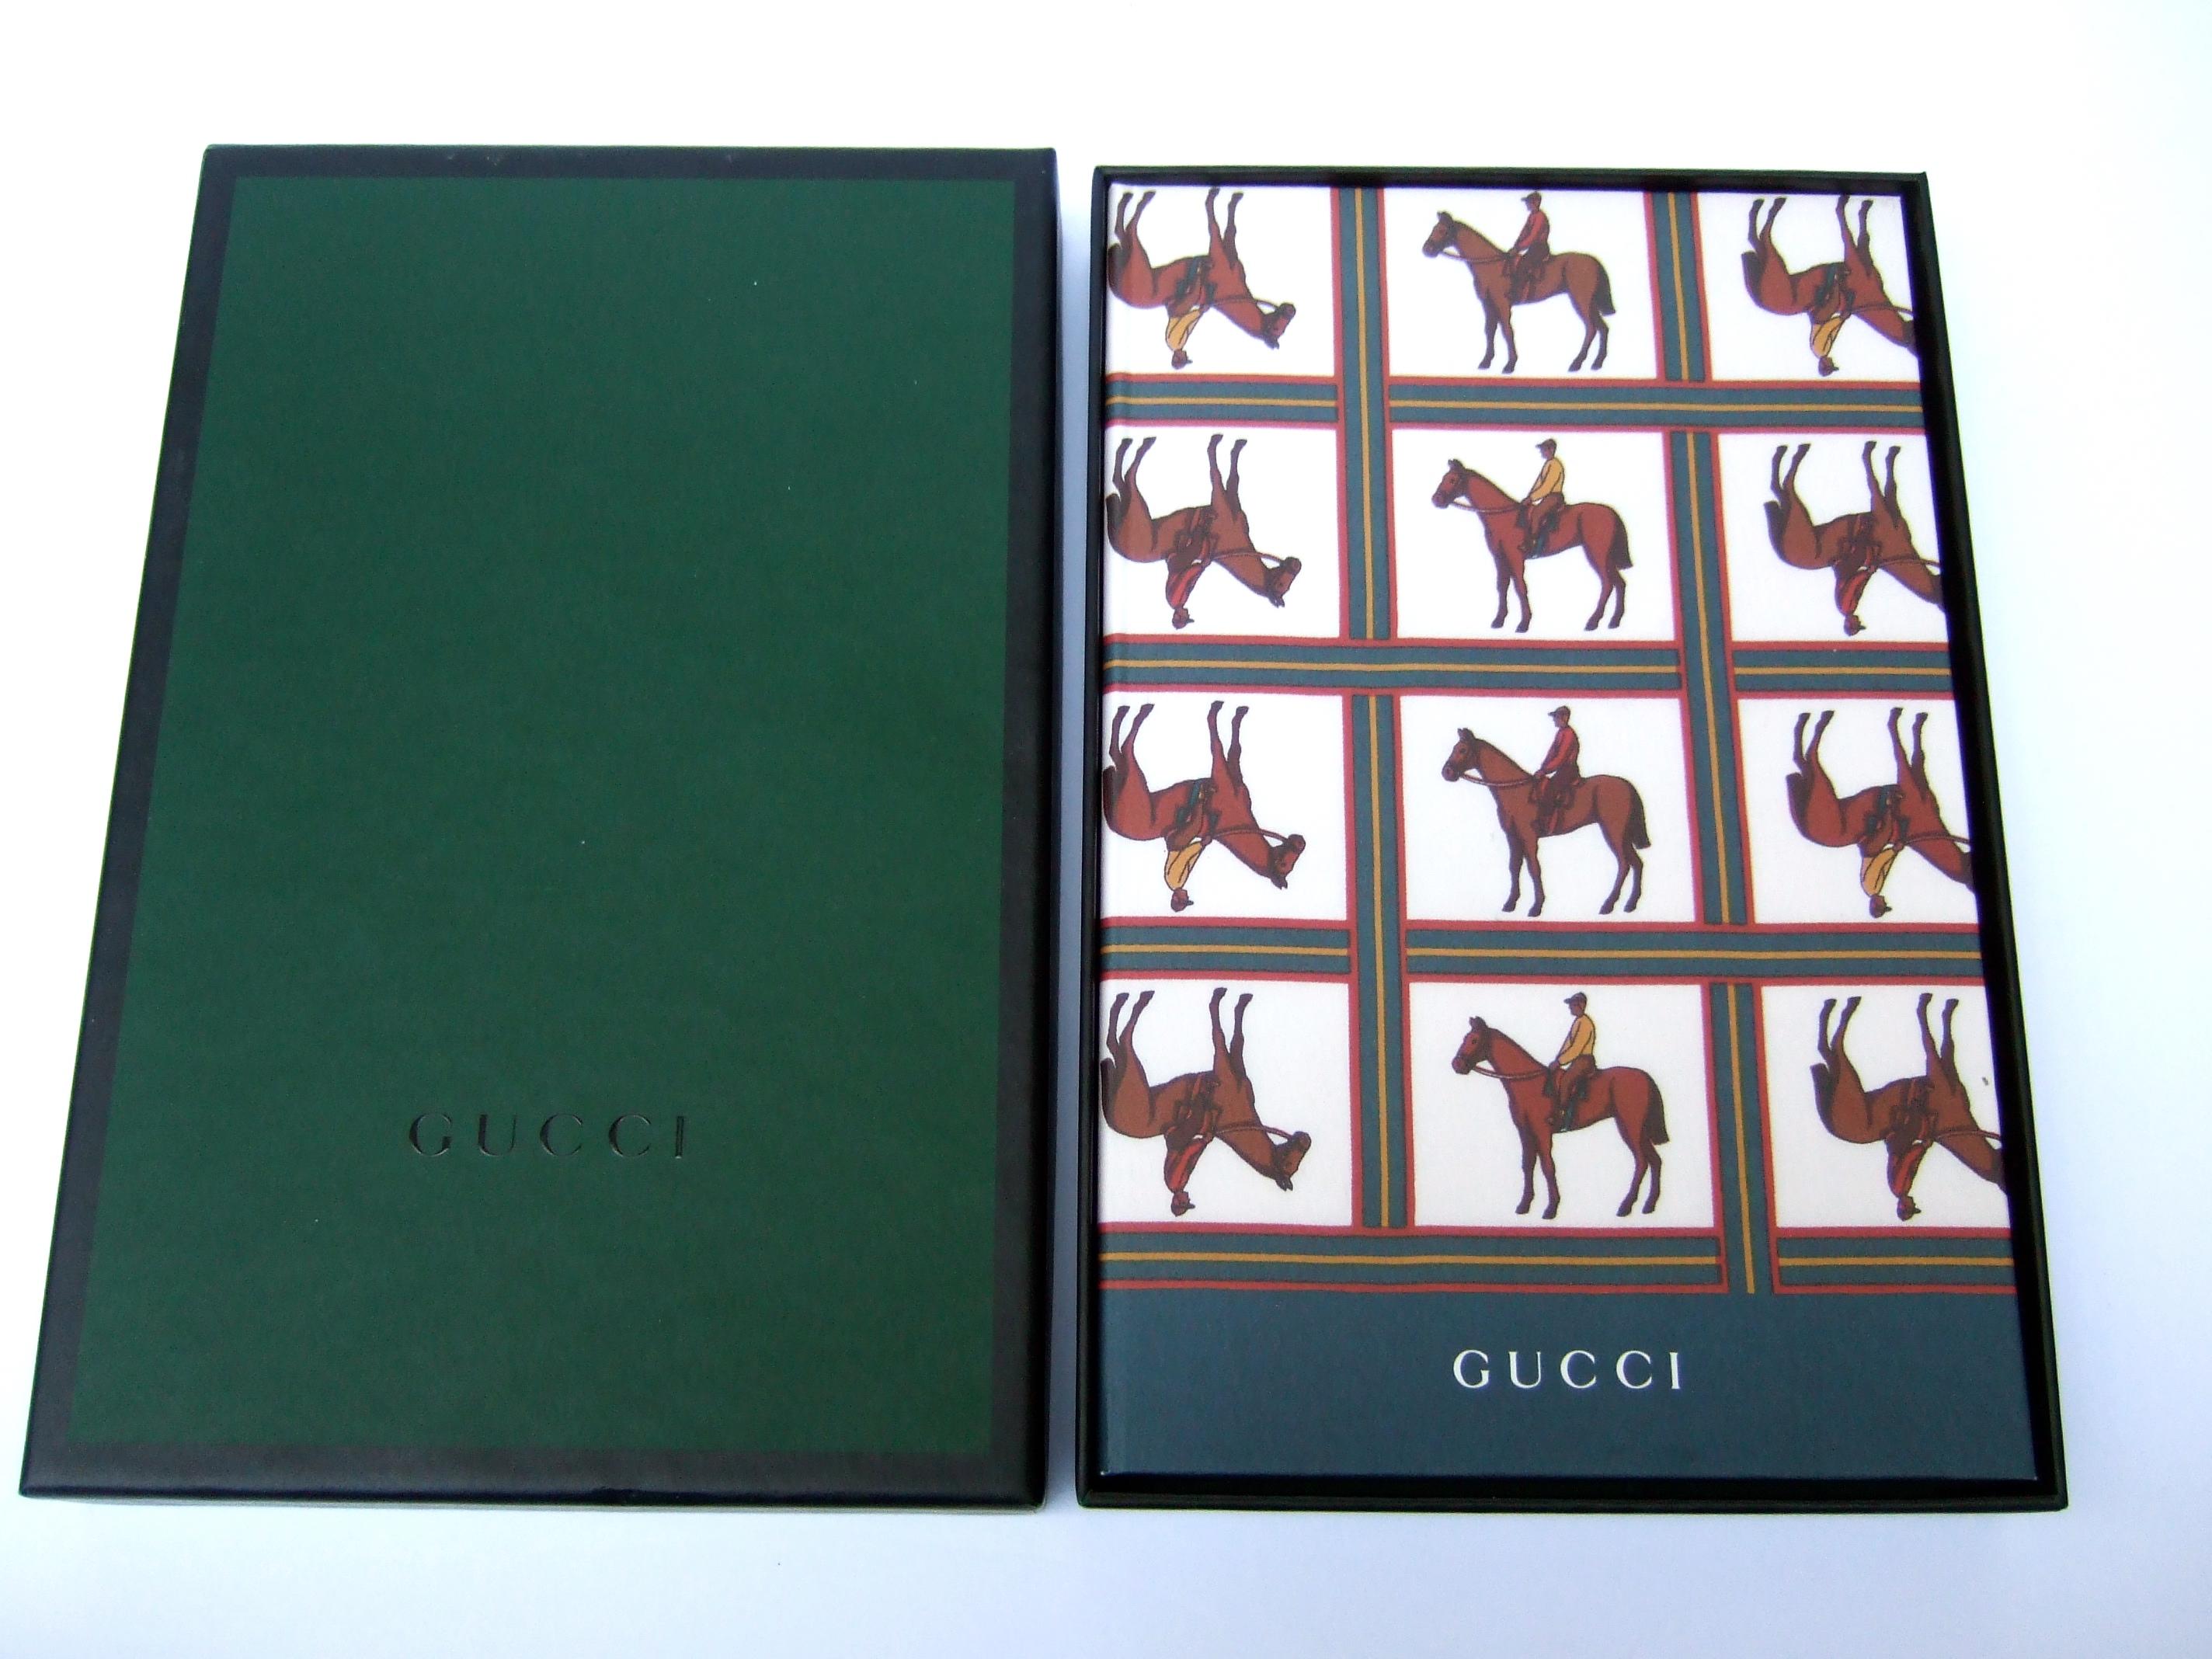 Gucci Equine Design Note Cards & Journal Book Stationery Set in Gucci Box c 1990 For Sale 4